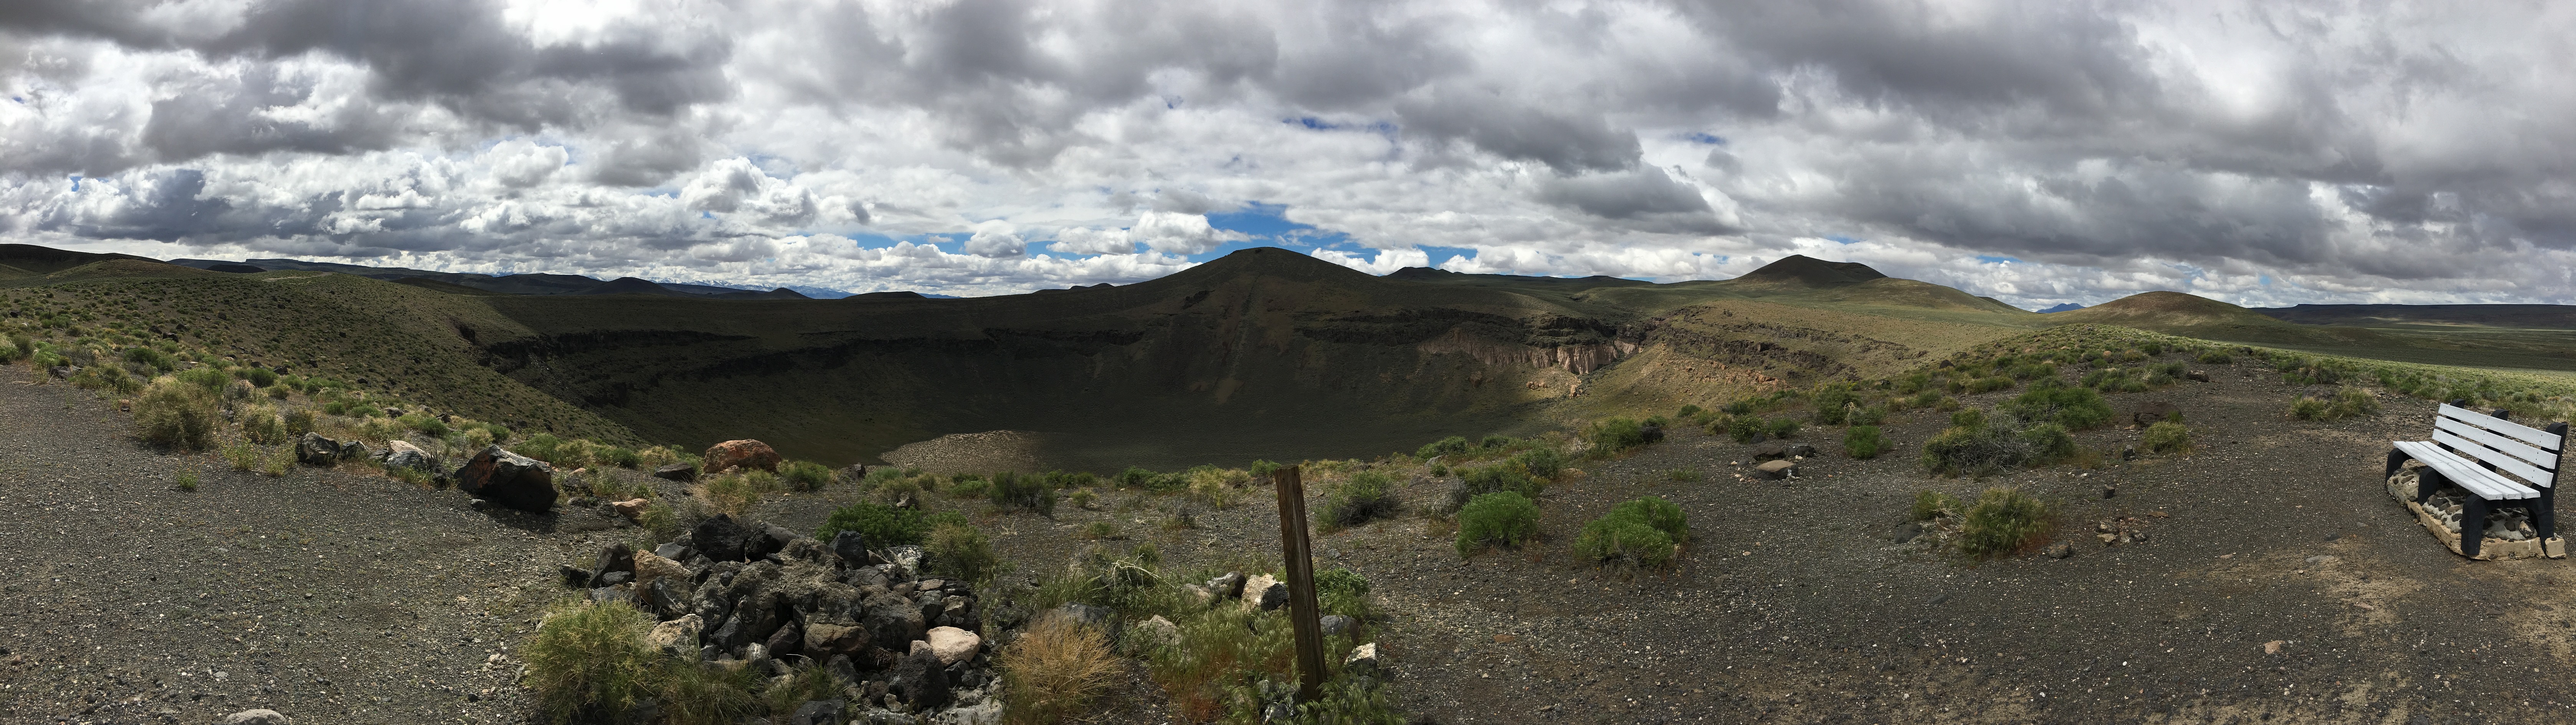 A panorama of Lunar Crater National Natural Landmark. The crater sinks into the earth and there are volcanic cones surrounding the crater. On the rim of the crater, there is a bench for visitors to sit and enjoy the view.